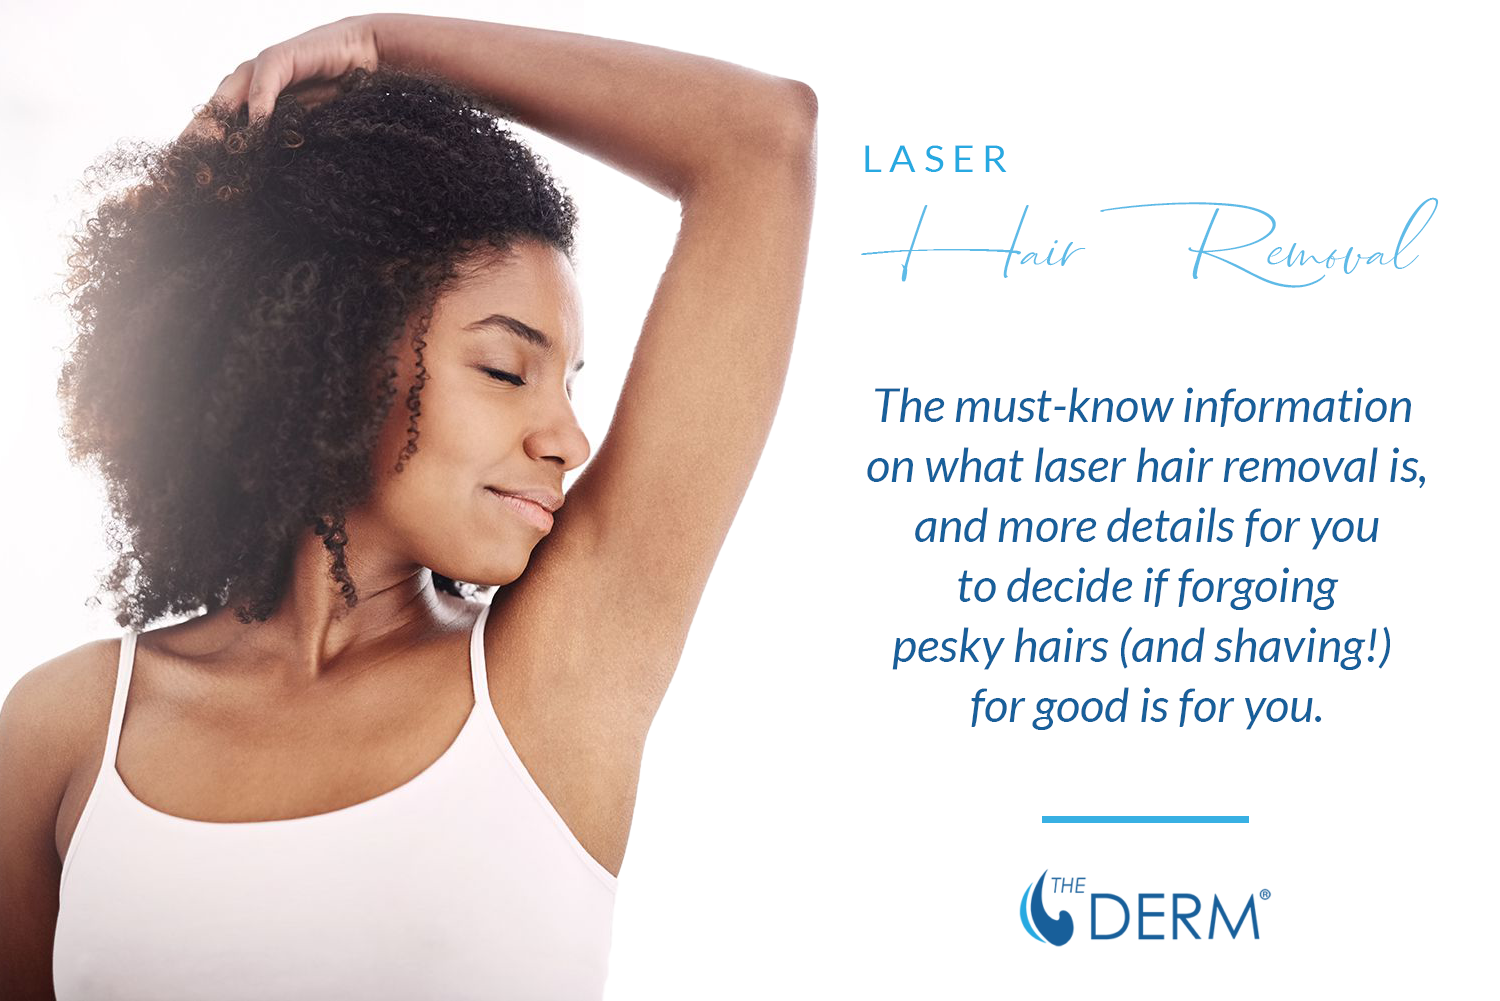 Laser Hair Removal - The Derm | Dermatologists in Cook County, IL